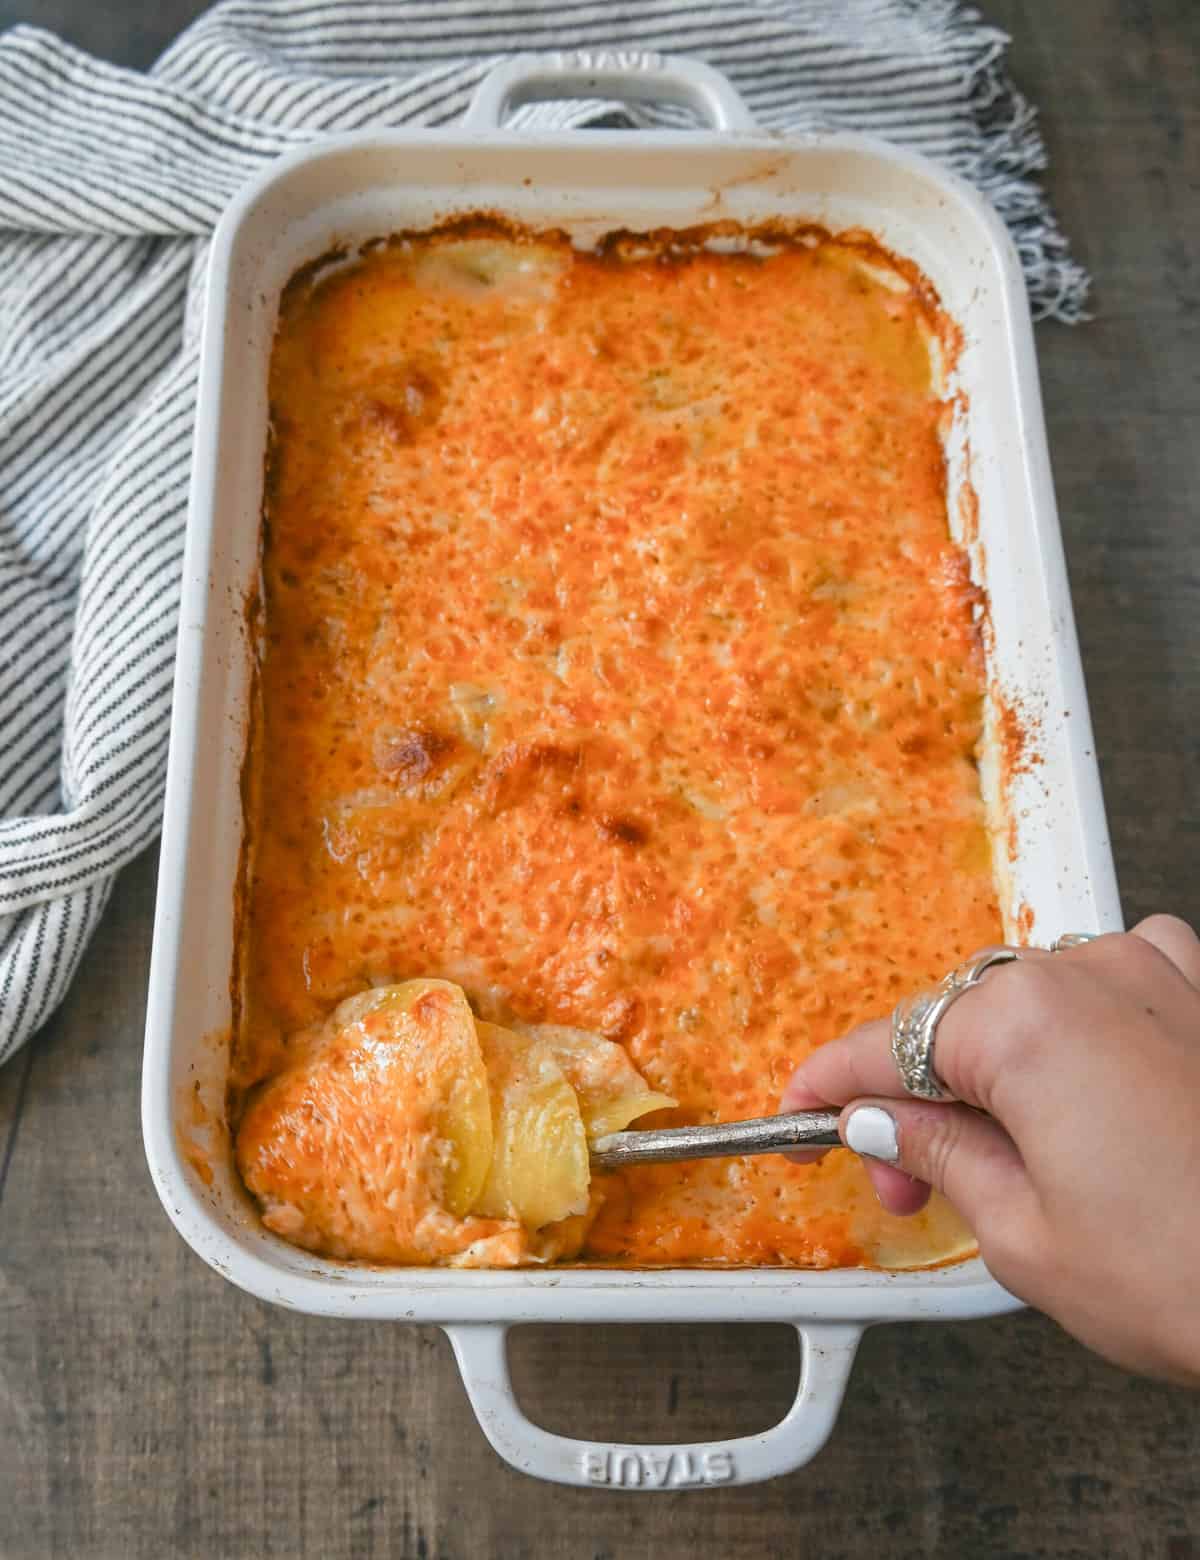 Cheesy Scalloped Potatoes. These creamy, cheesy scalloped potatoes are the perfect side dish and are made with thinly sliced potatoes, a decadent bechamel sauce, and layers upon layers of cheese and baked until melted and bubbly.